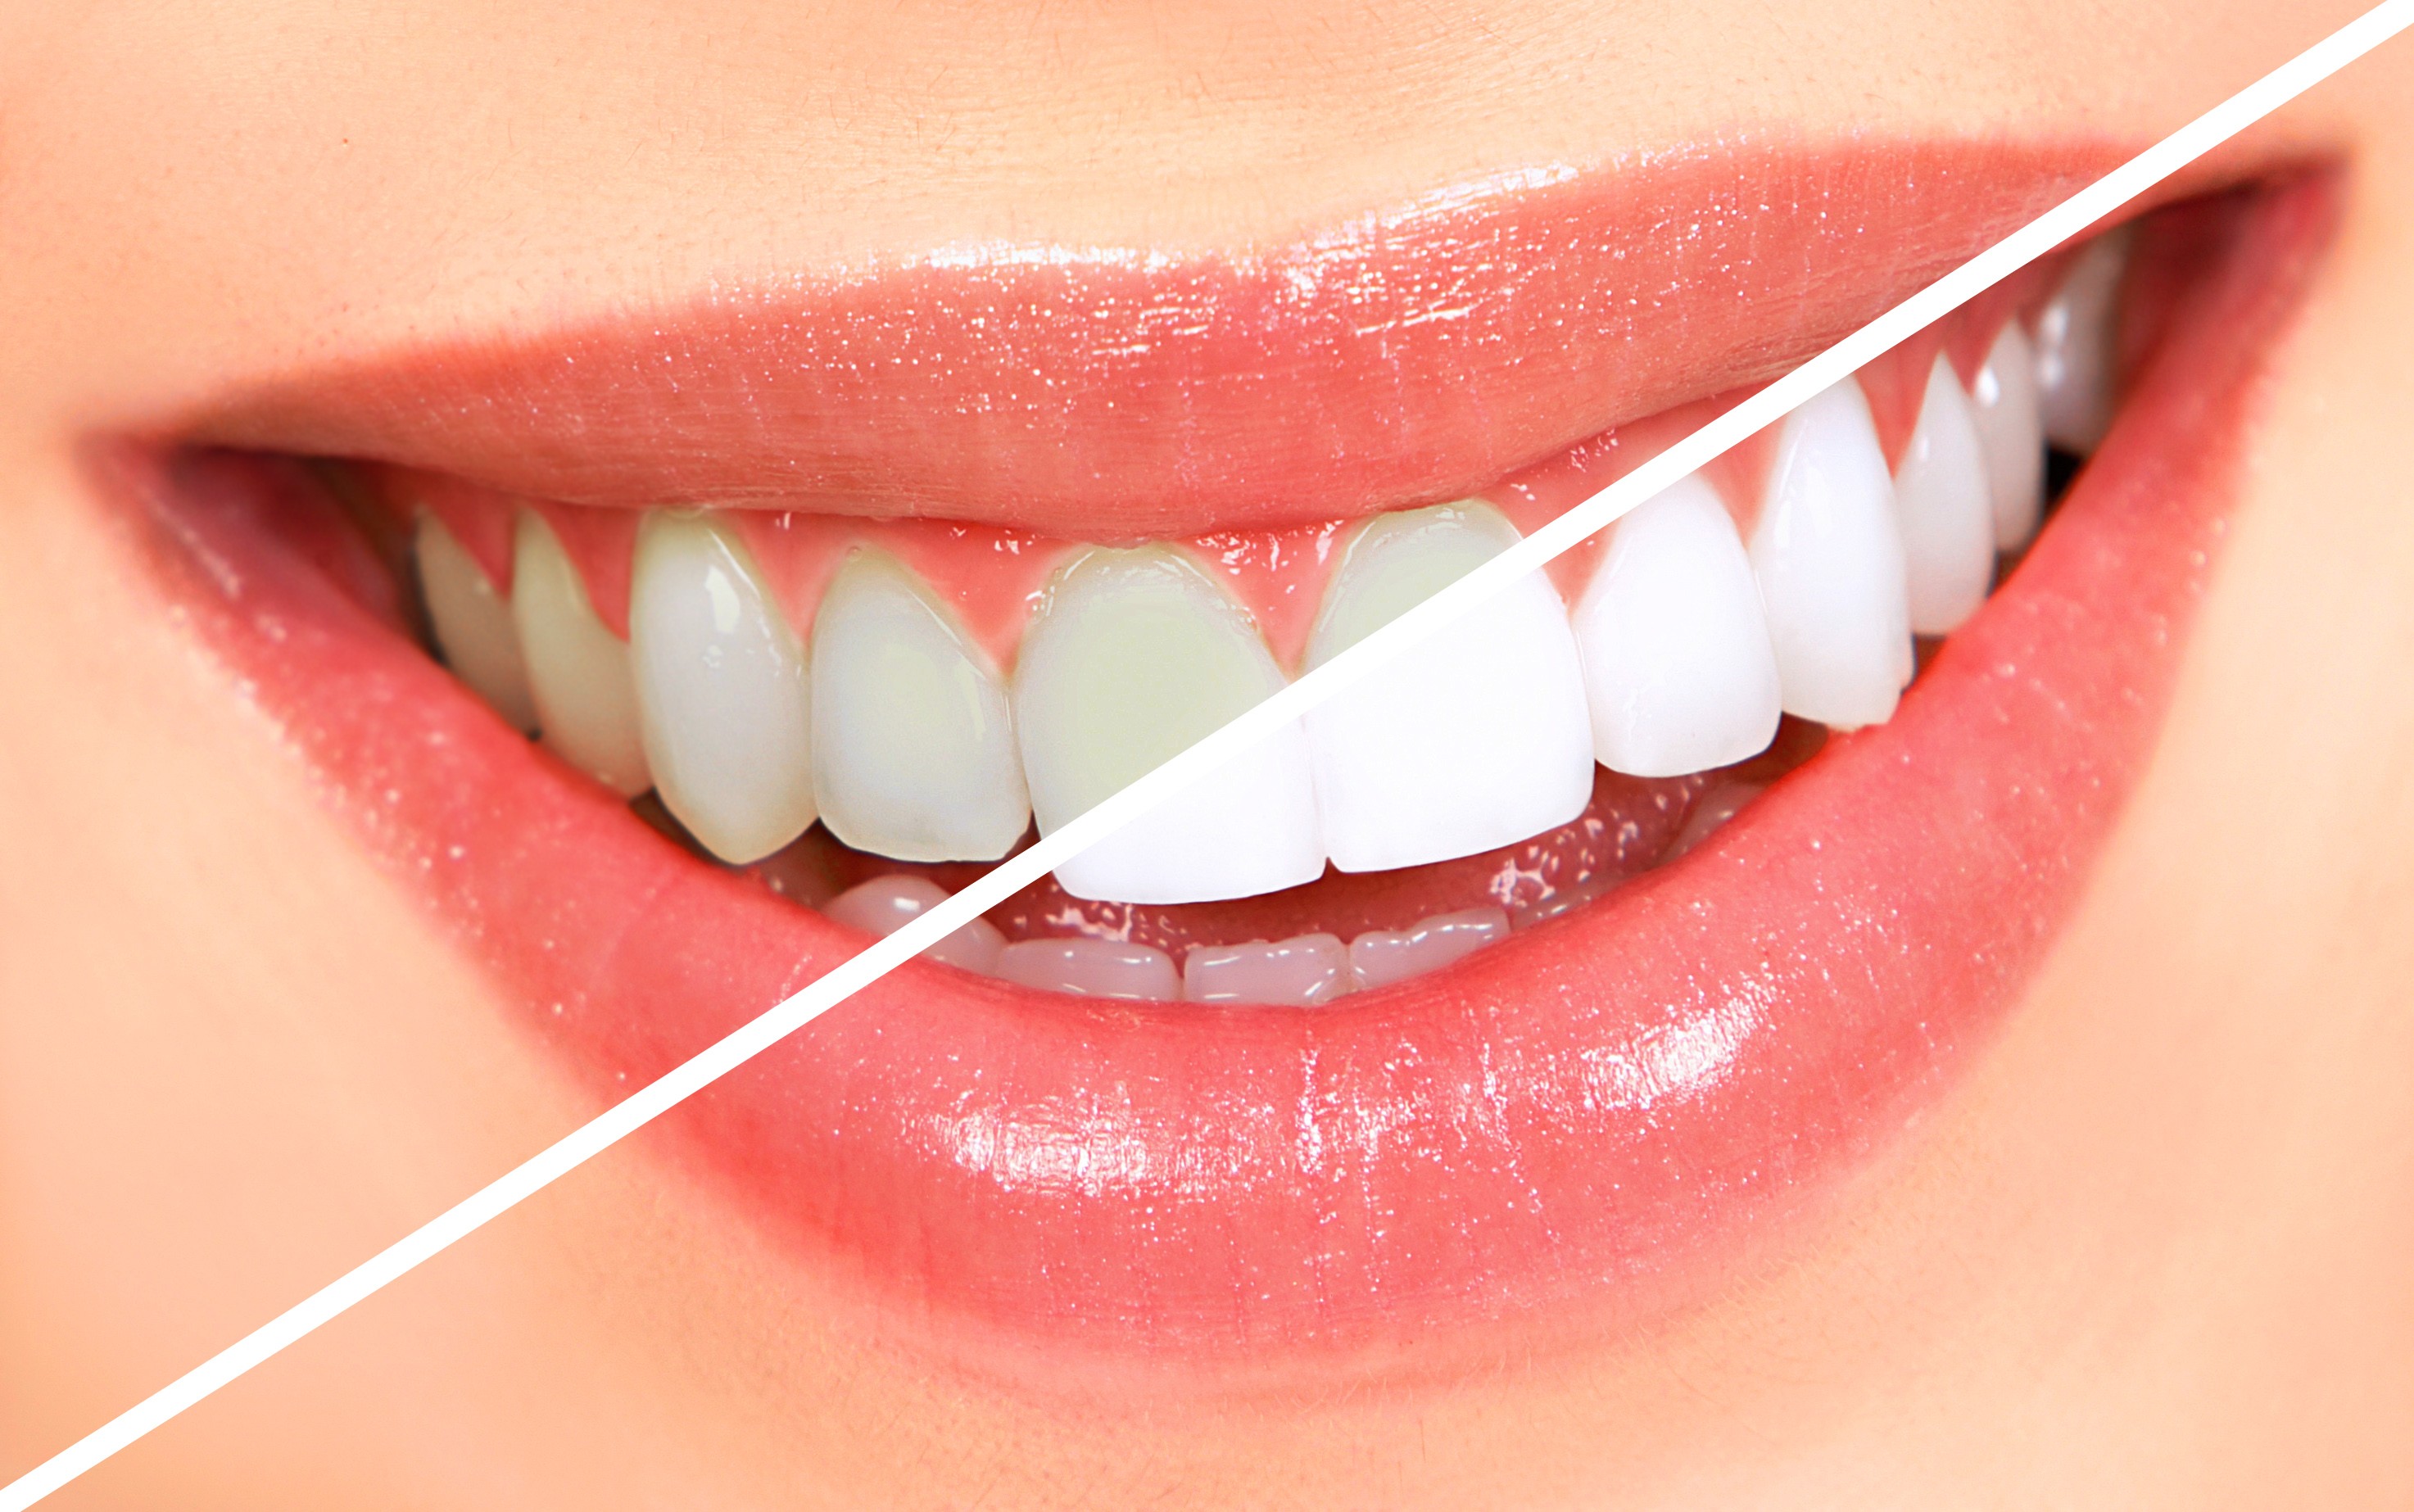 We are the best dentistry for teeth whitening.